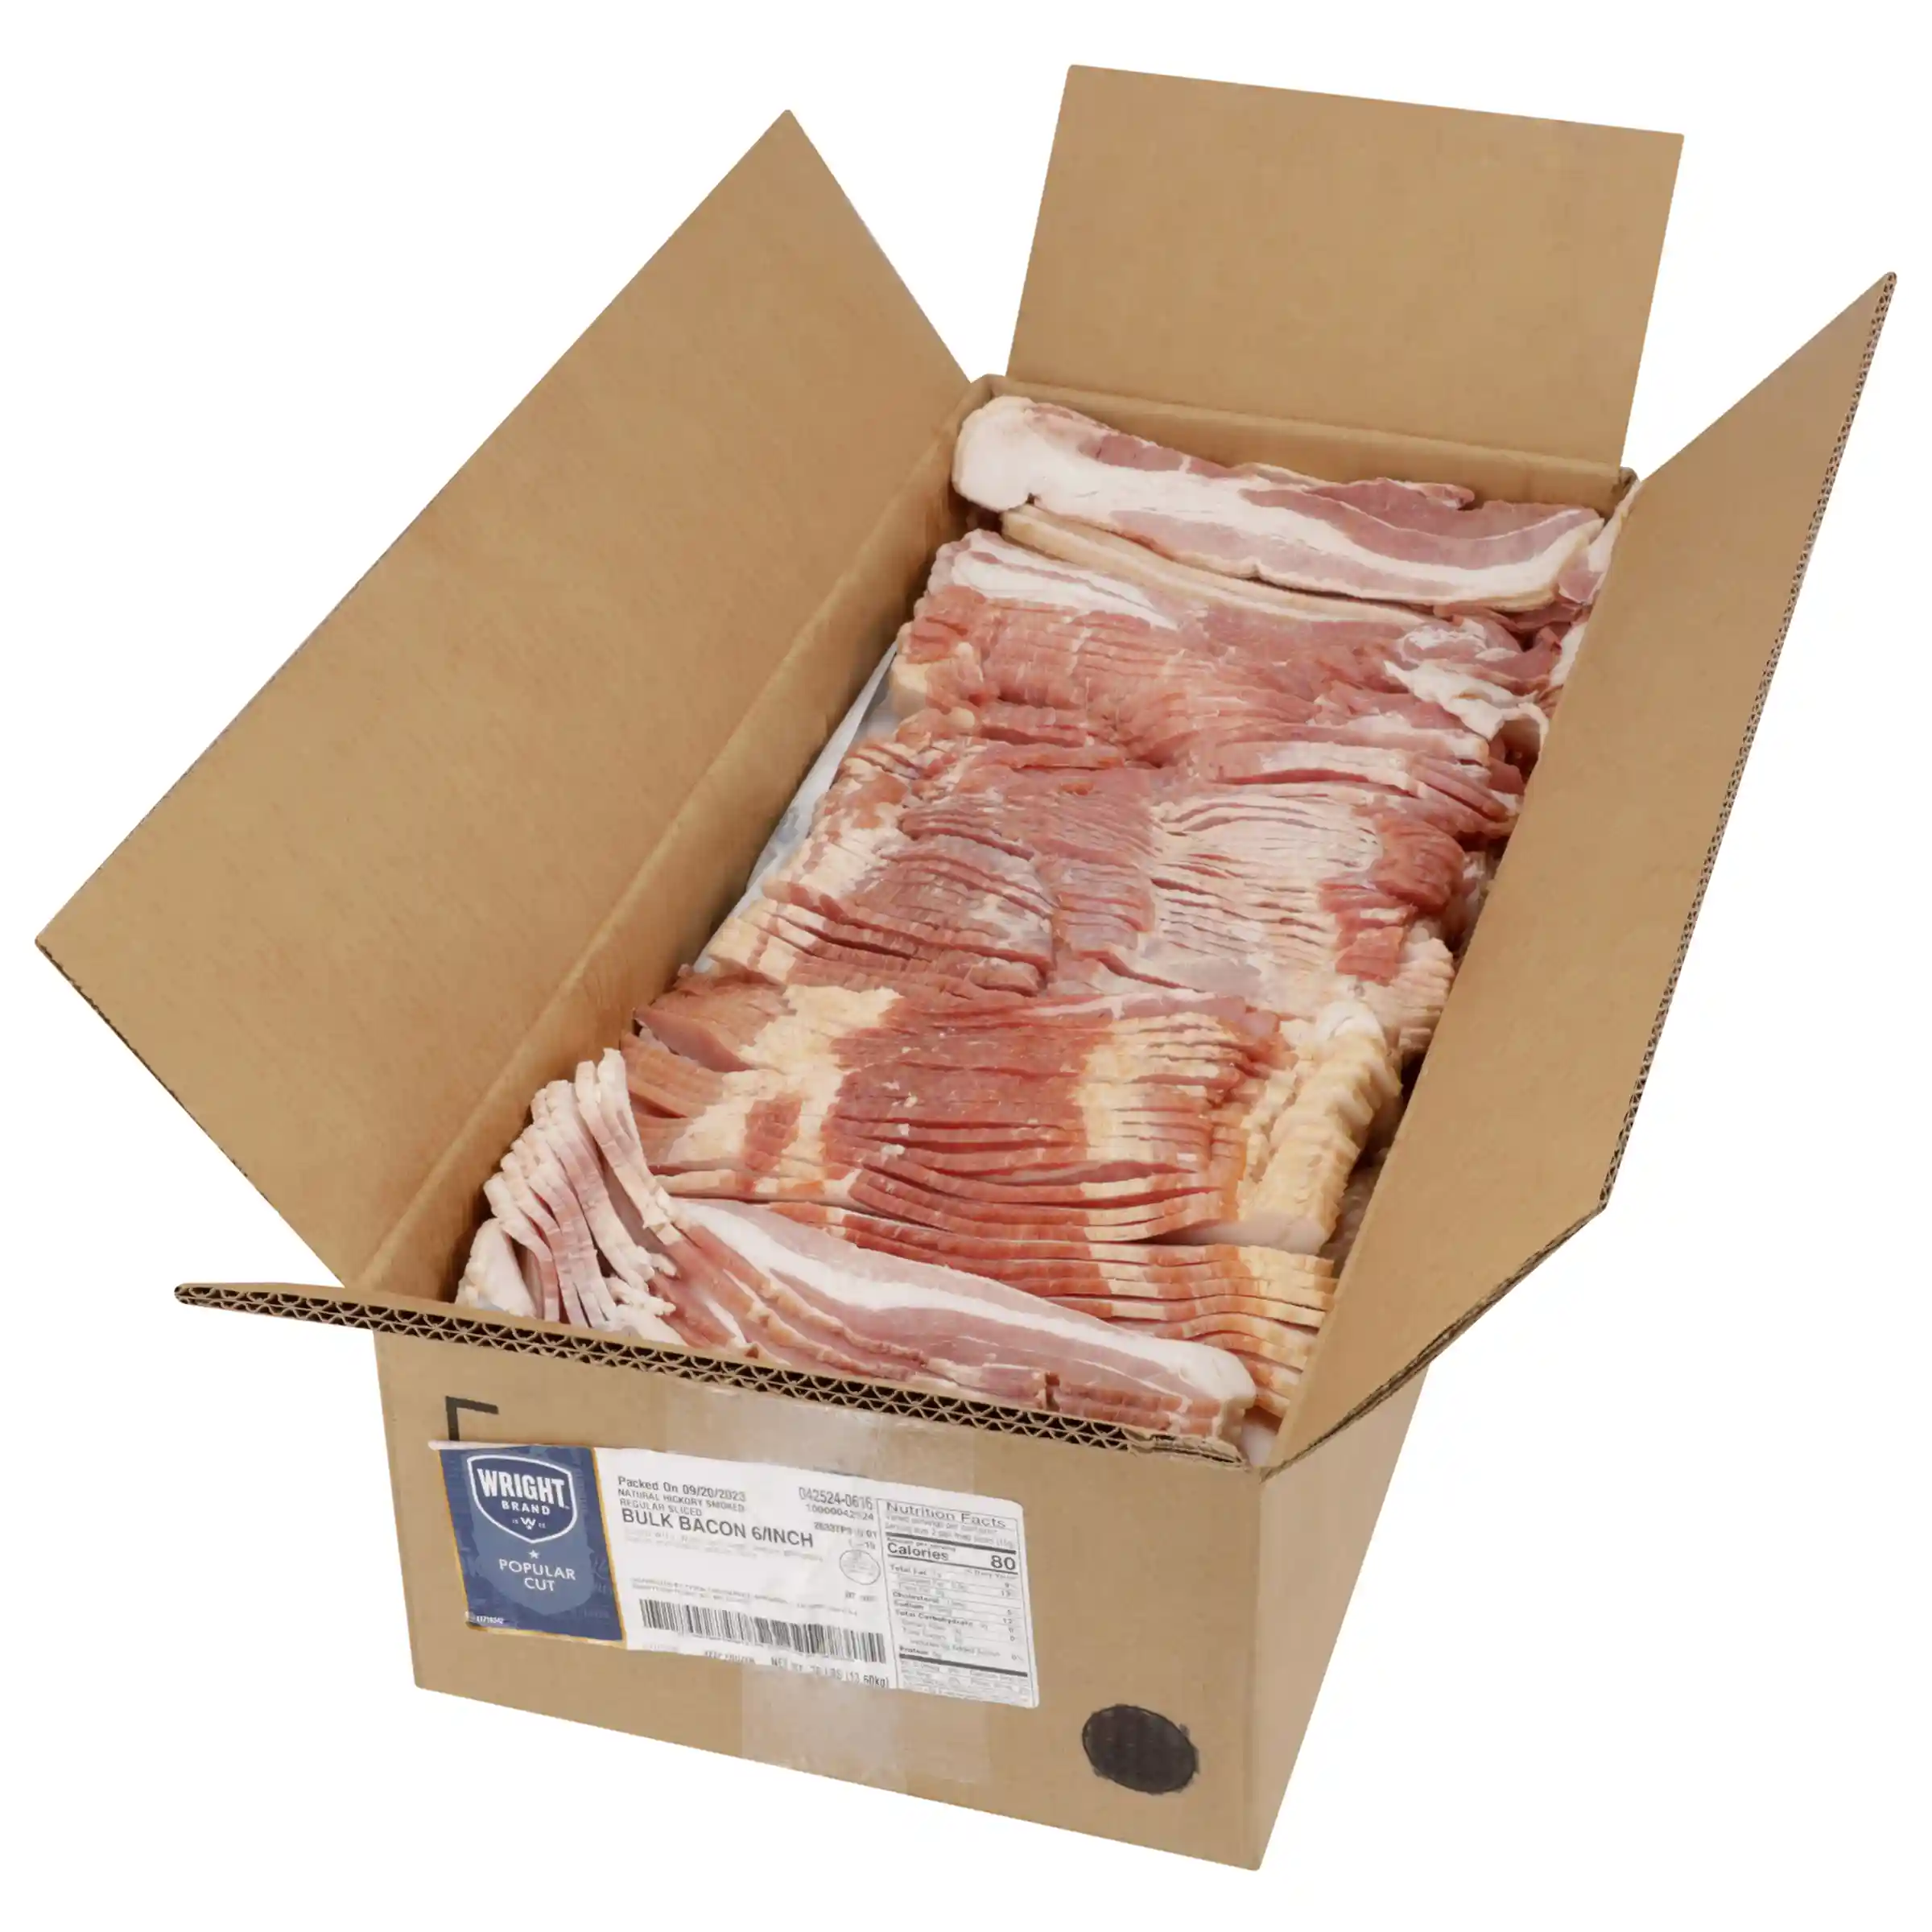 Wright® Brand Naturally Hickory Smoked Regular Sliced Bacon, Bulk, 30 Lbs, 6 Slices/Inch, Frozen_image_31